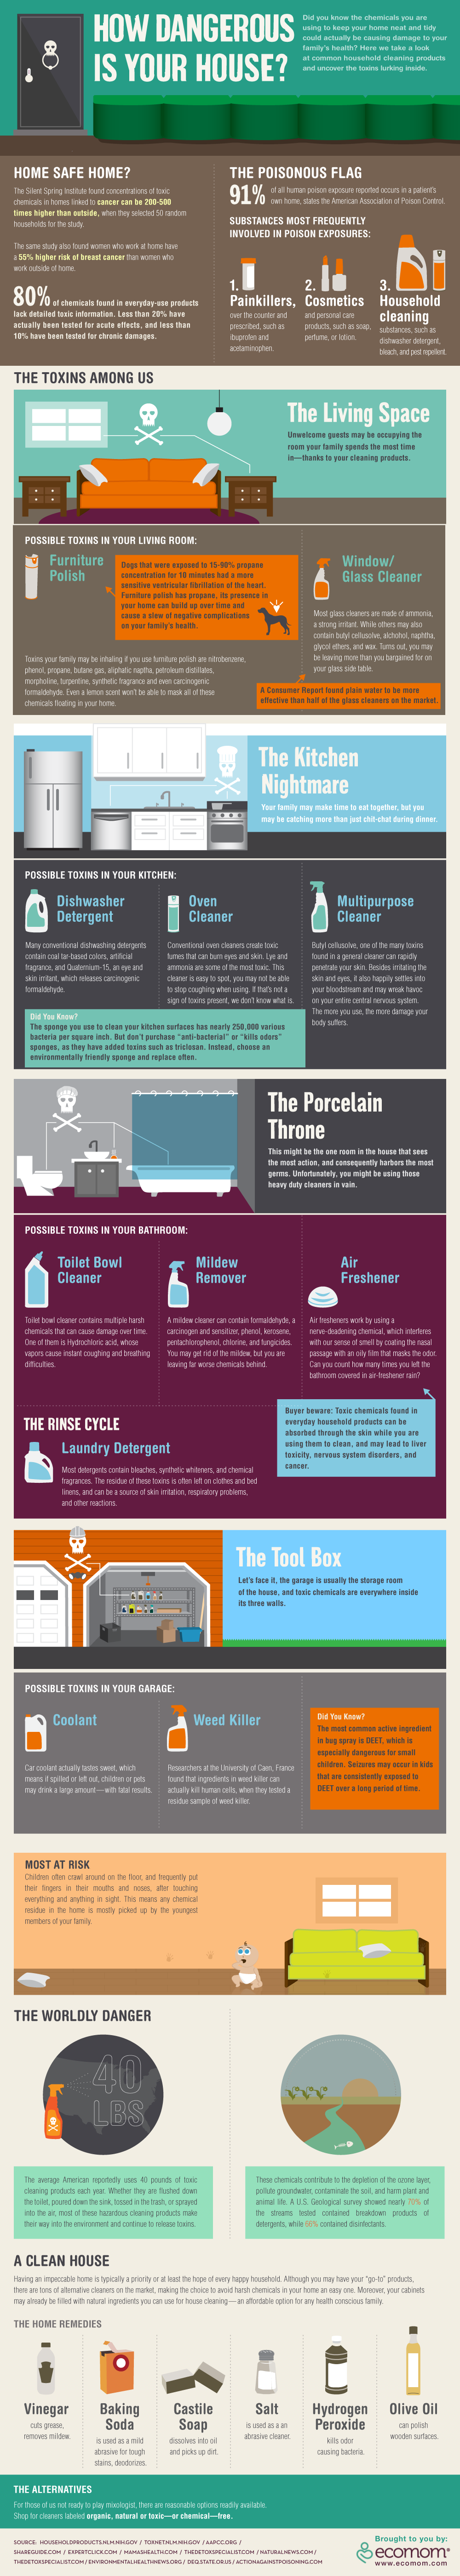 Infographic of dangers in your house,